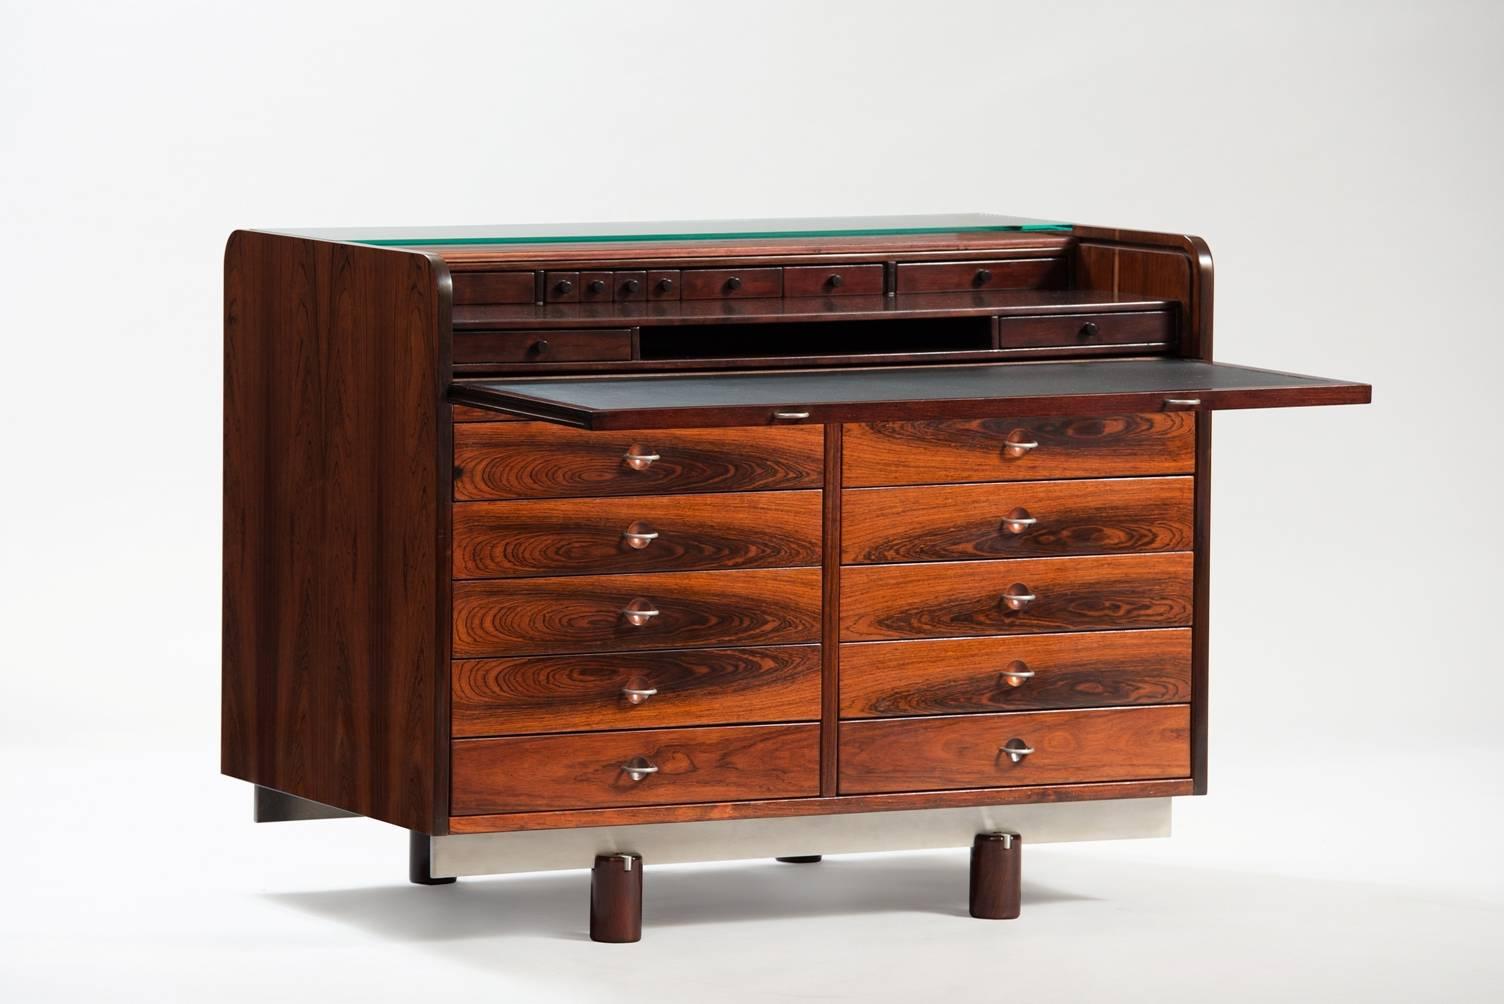 Rosewood writing desk 804 model, this roll top design opens by pulling out the leather writing surface. The glass shelf remains in place to hold items while roll top is moving.
Inside conceals eight drawers and ten outside drawers with half circle